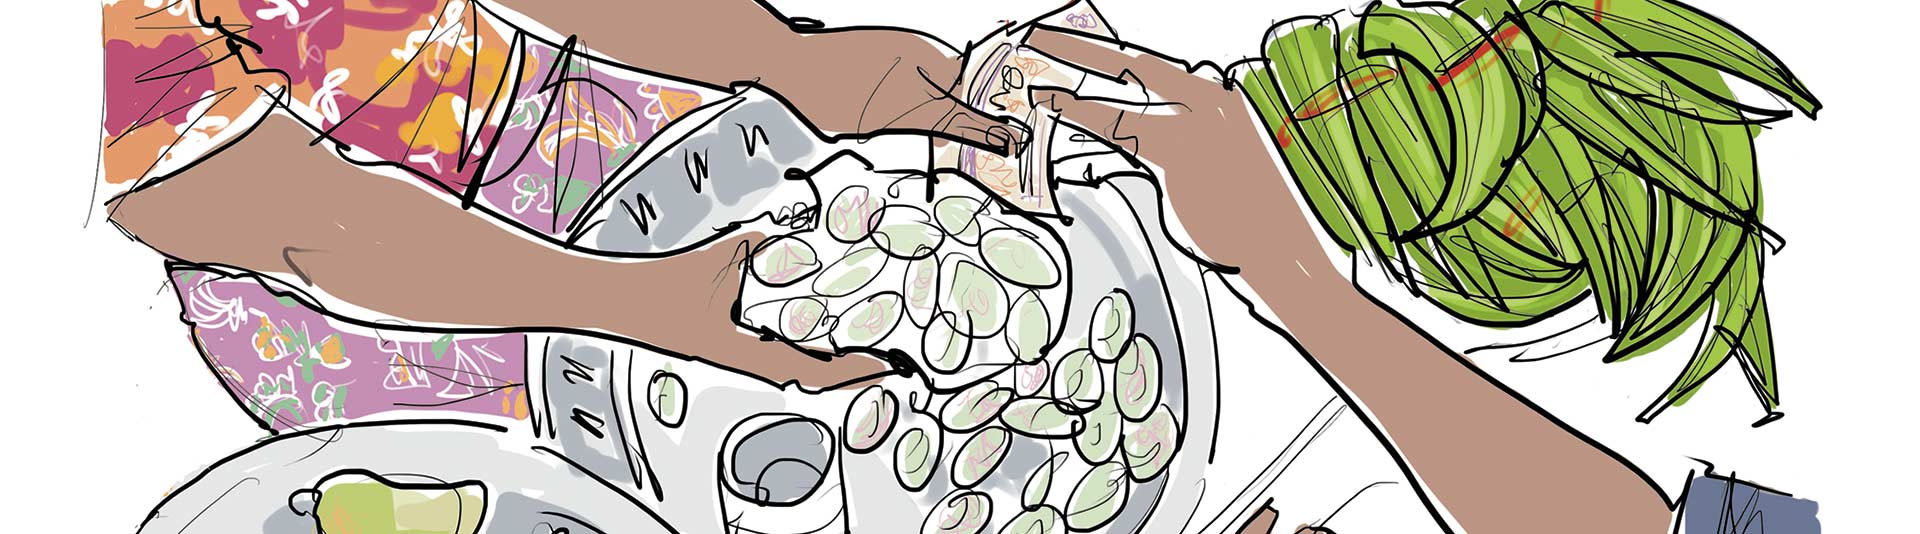 An illustration of two people, only their arms visible, trading money for some beans.